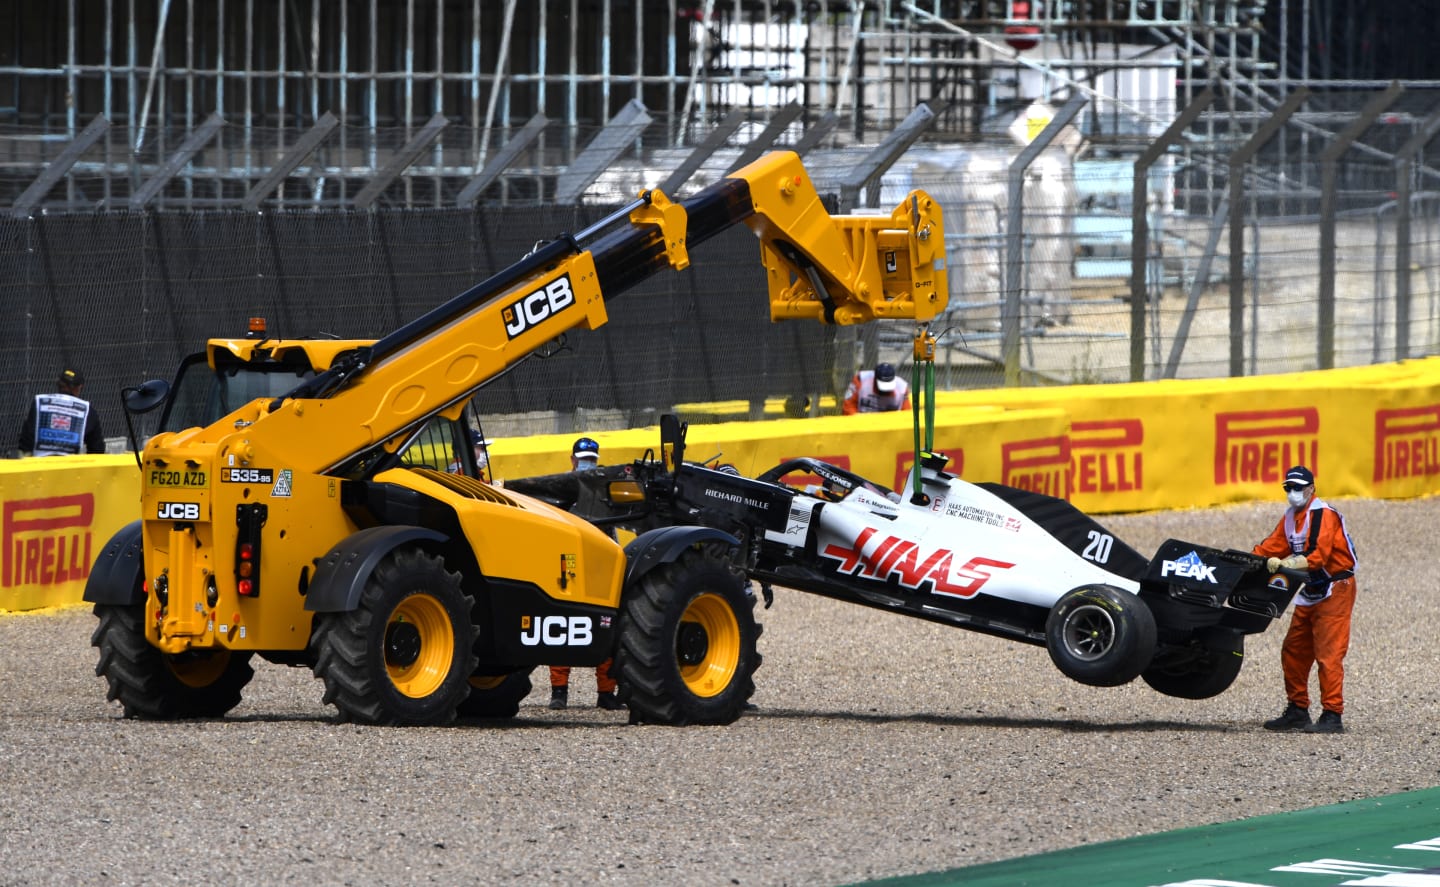 NORTHAMPTON, ENGLAND - AUGUST 02: The car of Kevin Magnussen of Denmark and Haas F1 is taken away after spinning off during the F1 Grand Prix of Great Britain at Silverstone on August 02, 2020 in Northampton, England. (Photo by Rudy Carezzevoli/Getty Images)